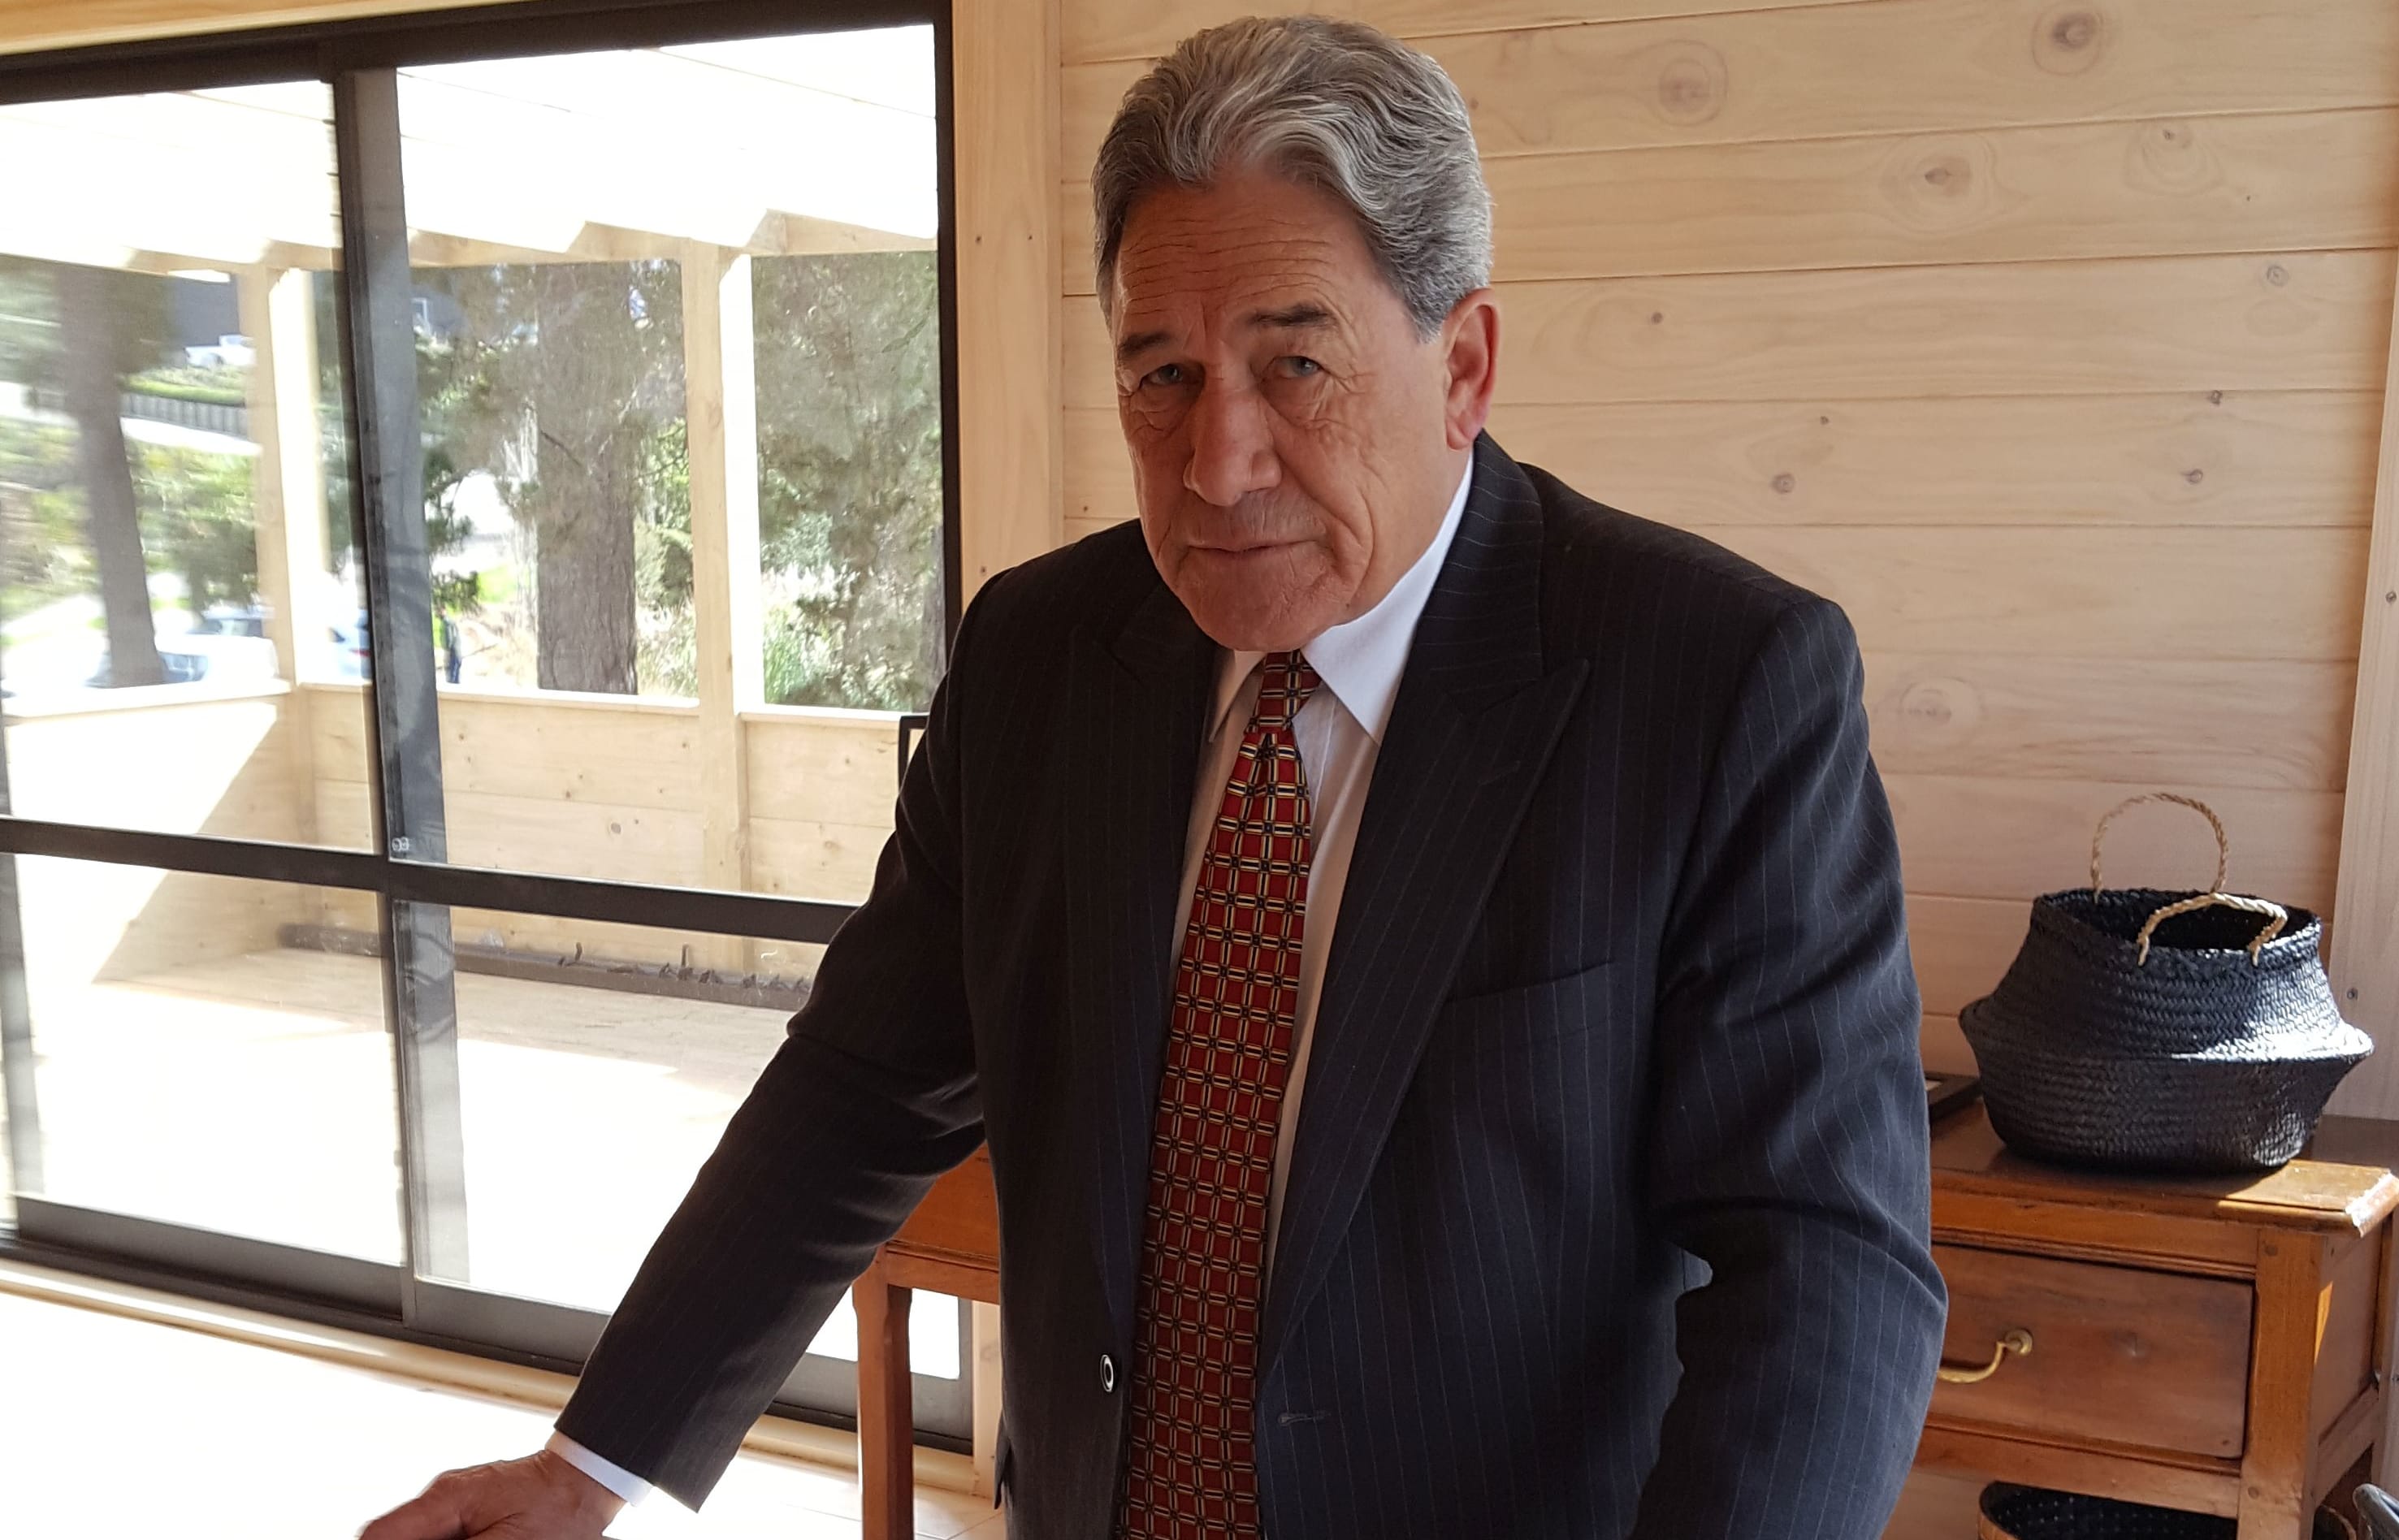 Winston Peters at the Mt Pokaka Timber Mill during his 2017 election campaign.